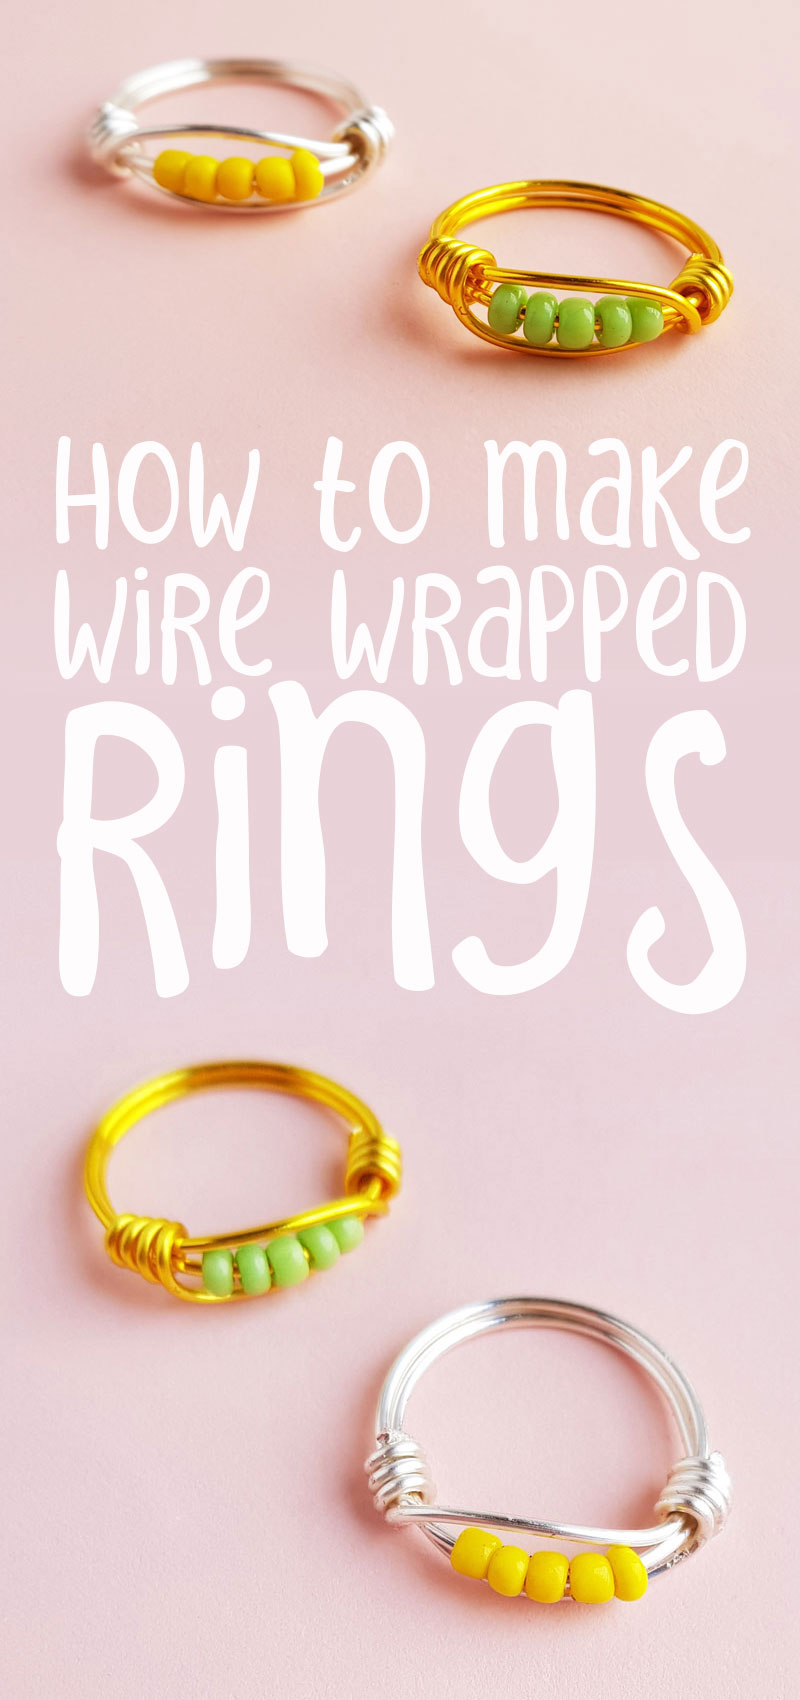 Wire Wrapped Ring Tutorial for Beginners - Moms & Crafters